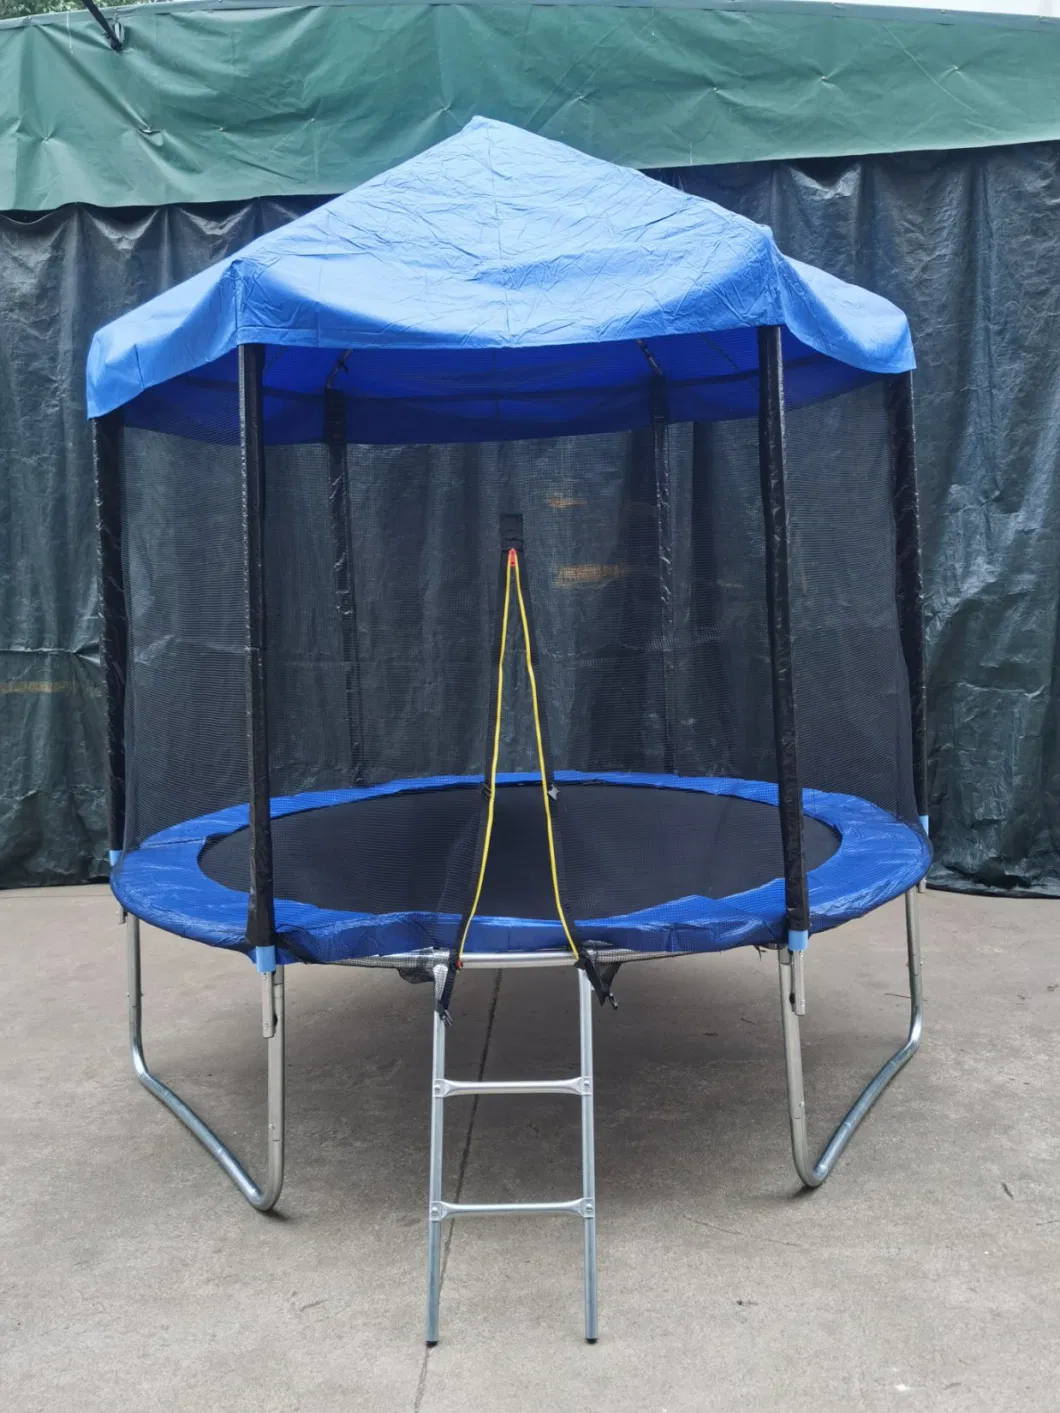 Nanjian High Quality 8ft Outdoor Round Trampoline with Enclose